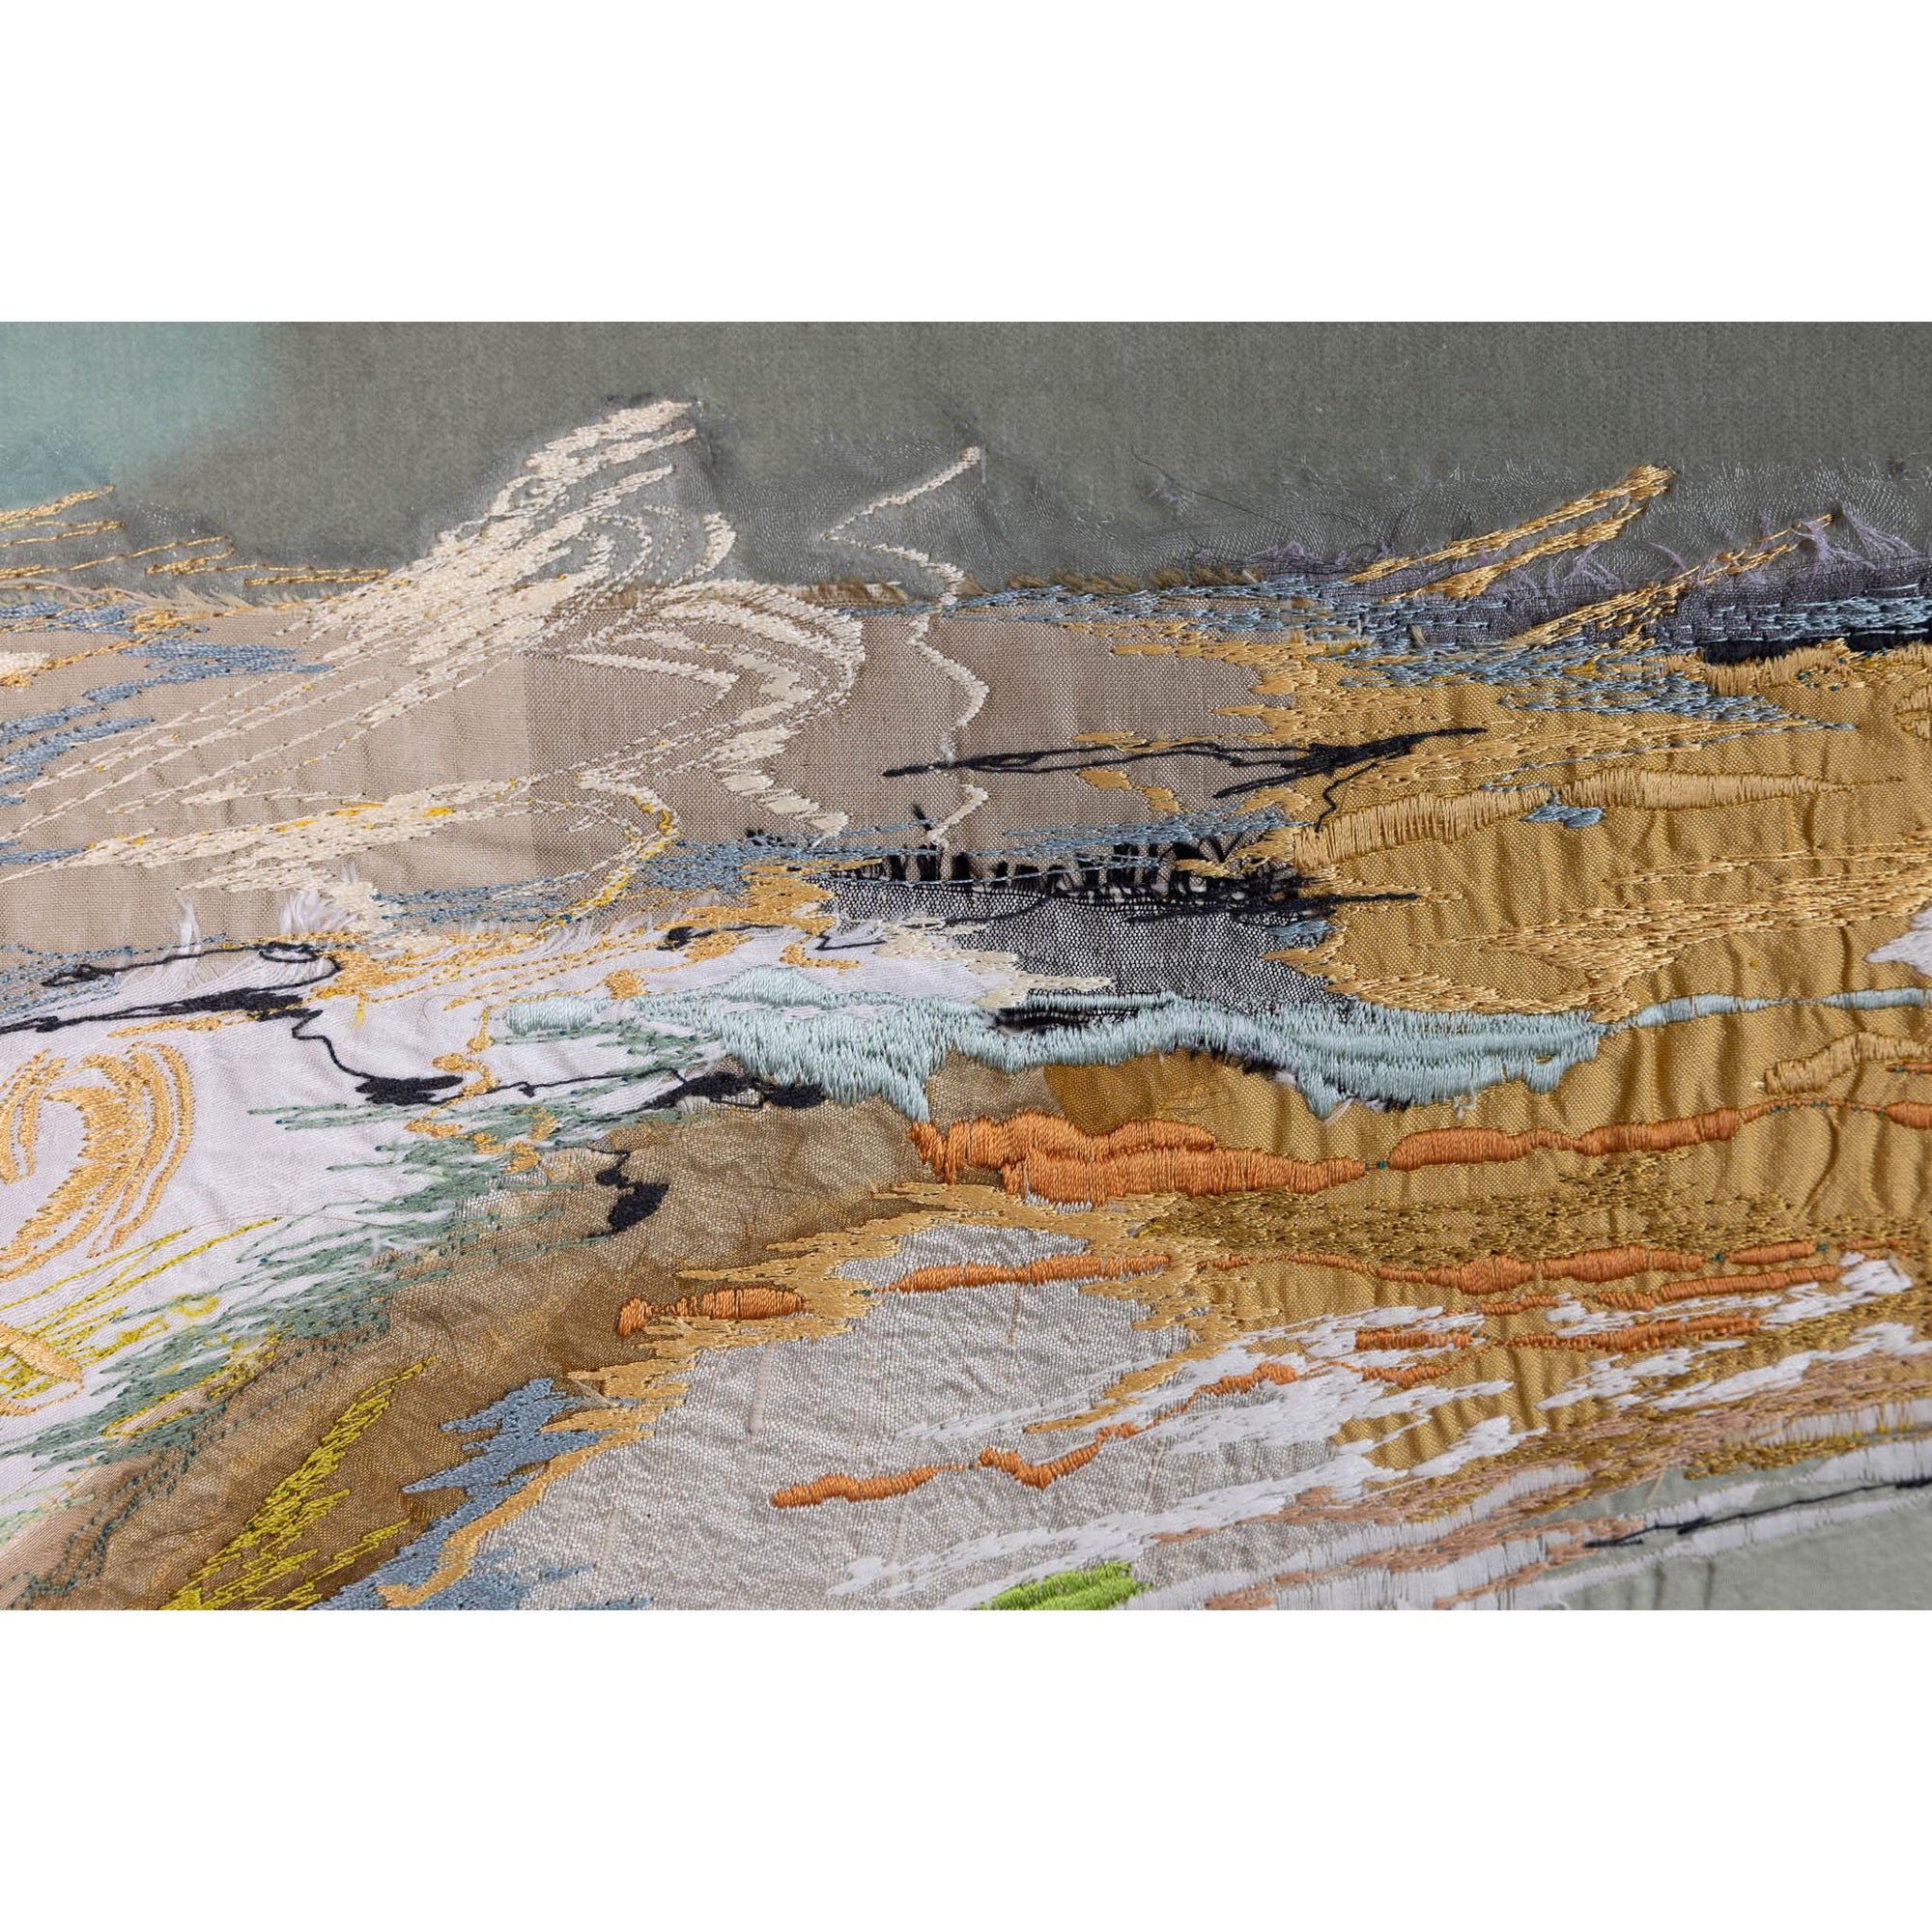 'Sundowner' dynamic stitched textiles by Sarah Pooley, available at Padstow Gallery, Cornwall